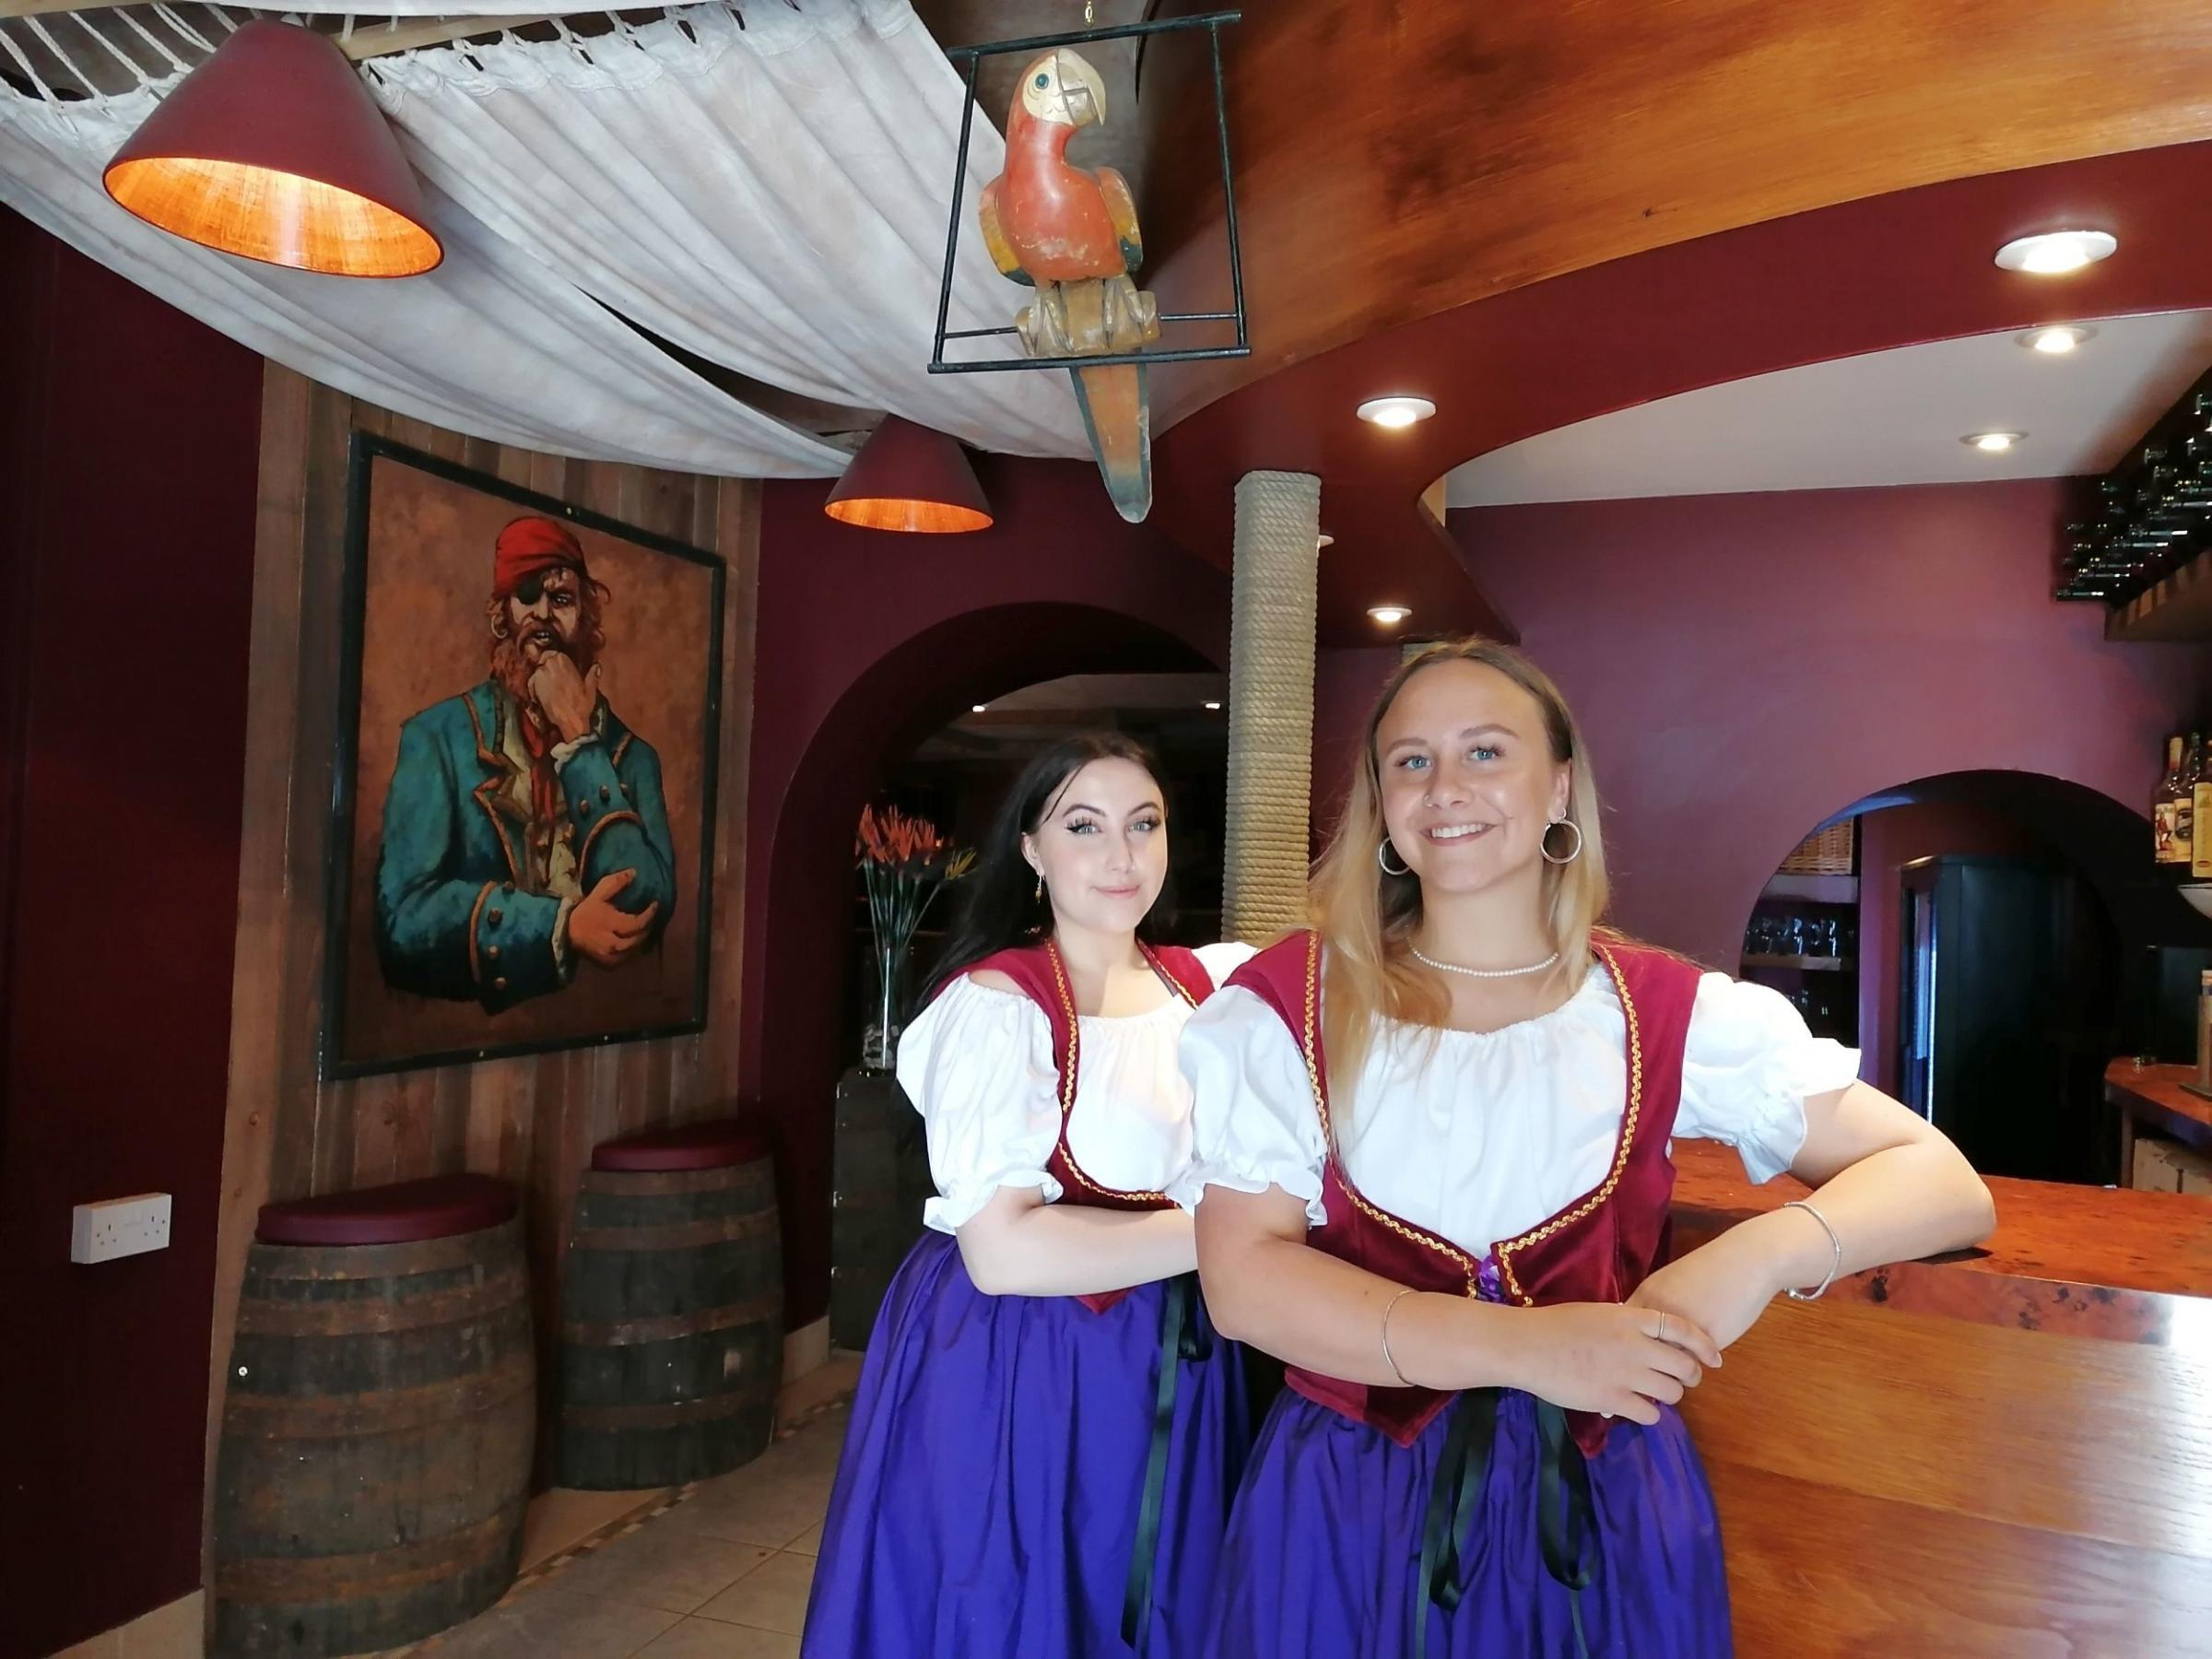 Waitresses Megan and Sadie look forward to welcoming you to the new Helston Meadery